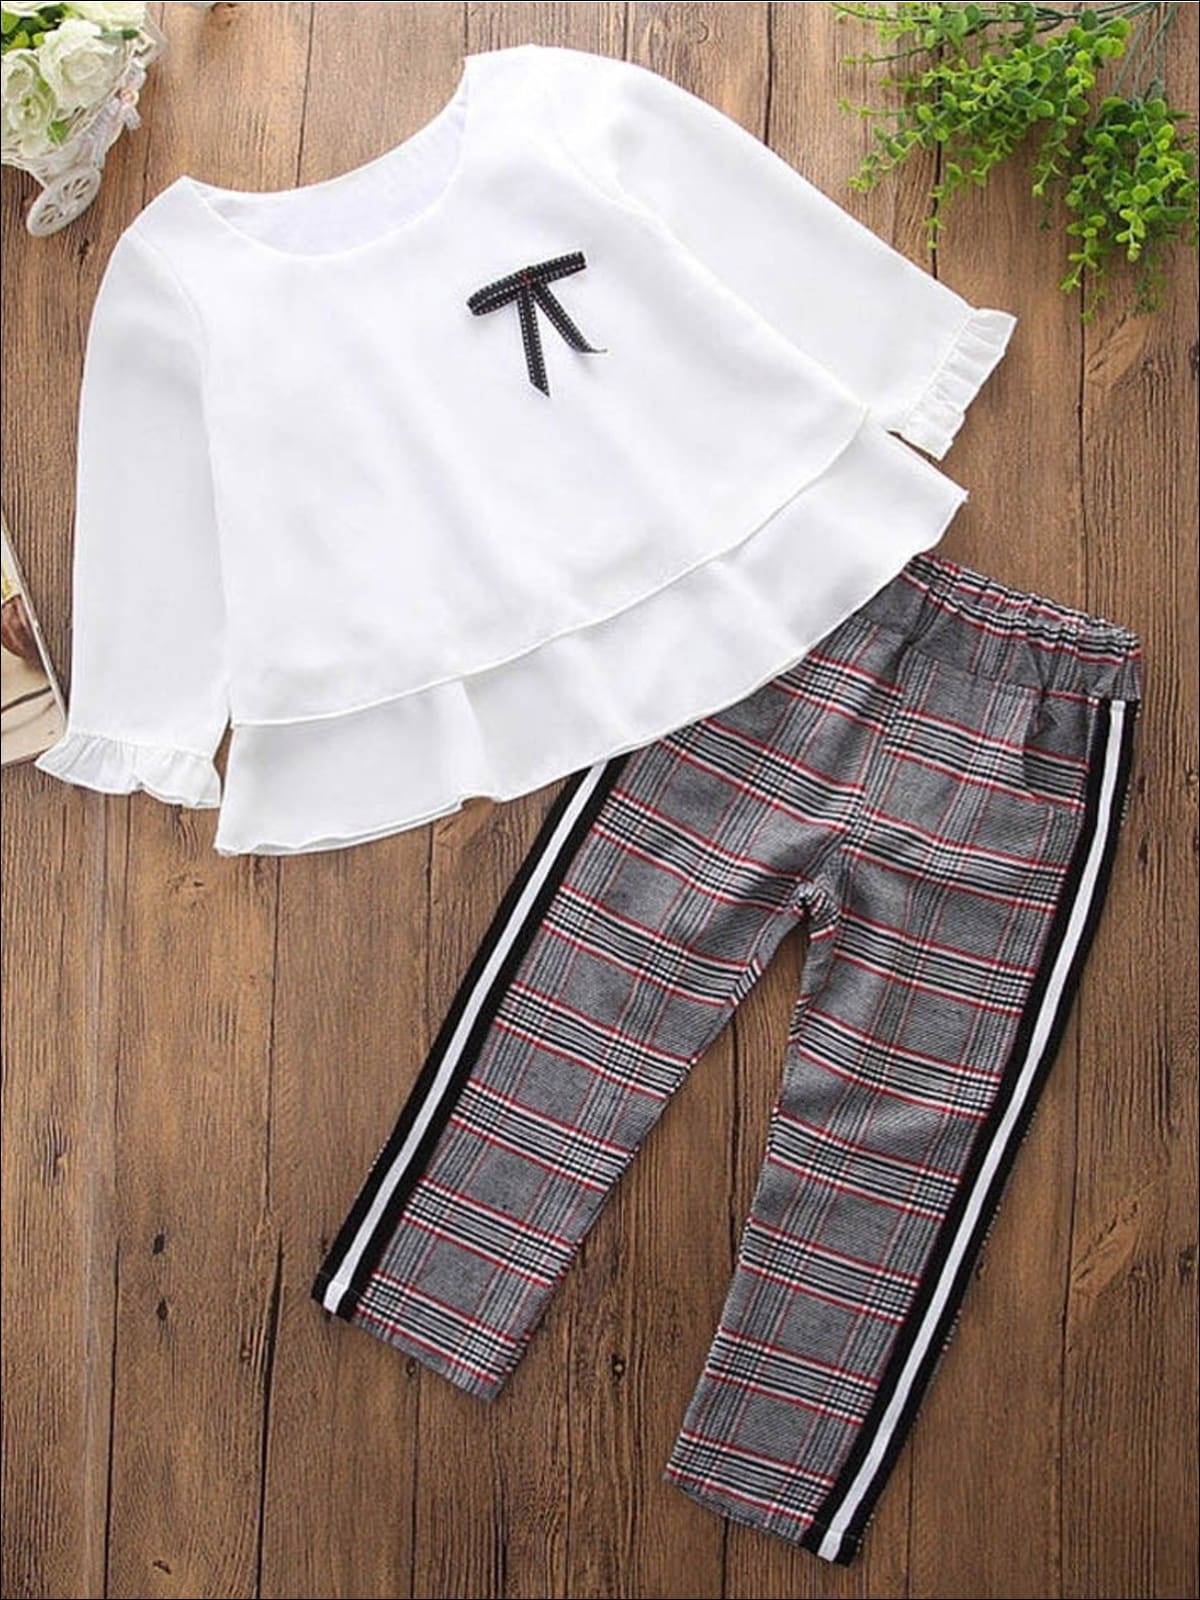 Girls Preppy White Long Sleeve Layered Ruffle Blouse With Ribbon & Plaid Trousers Set - White / 2T - Girls Fall Casual Set